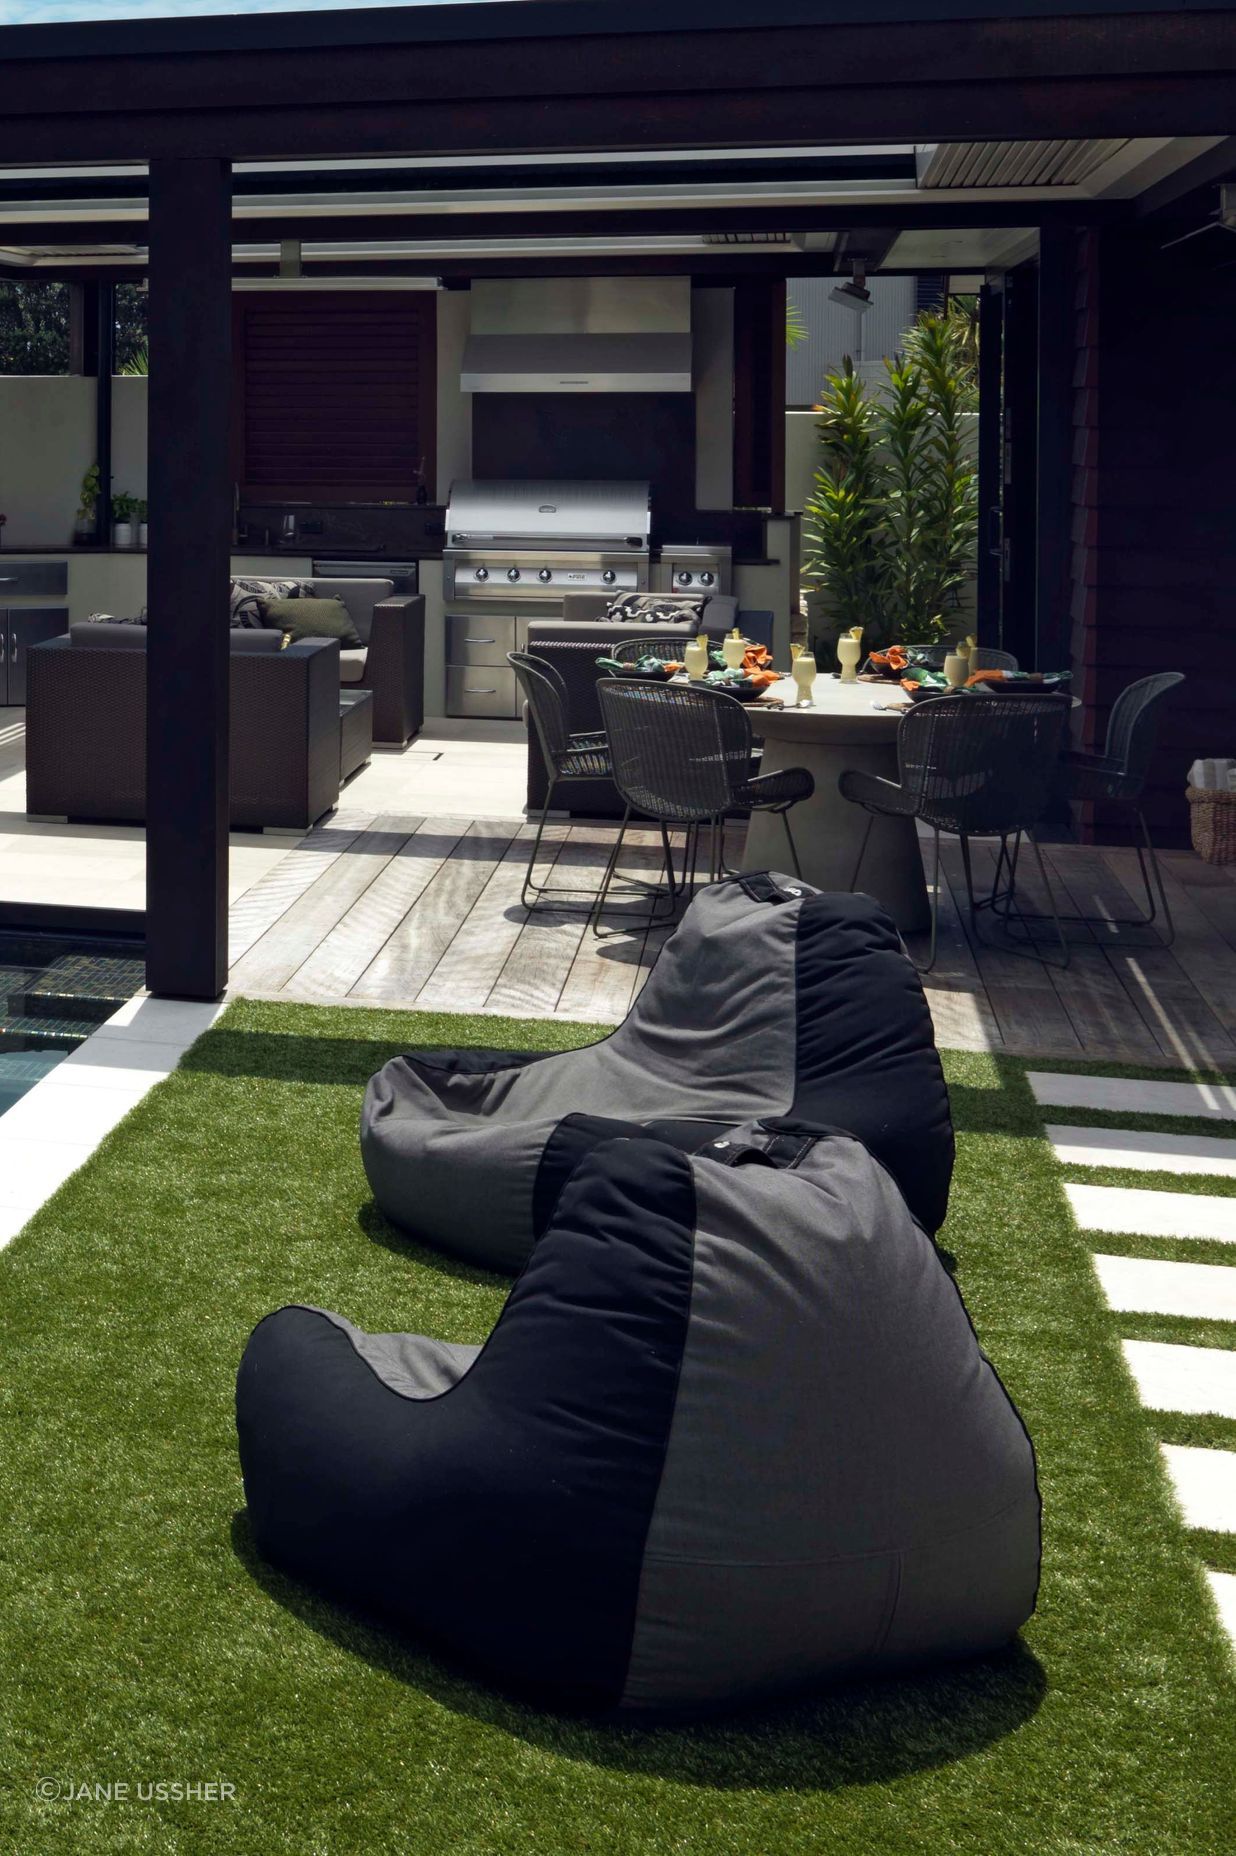 The outdoor kitchen and dining areas are adjacent to low-maintenance turf.